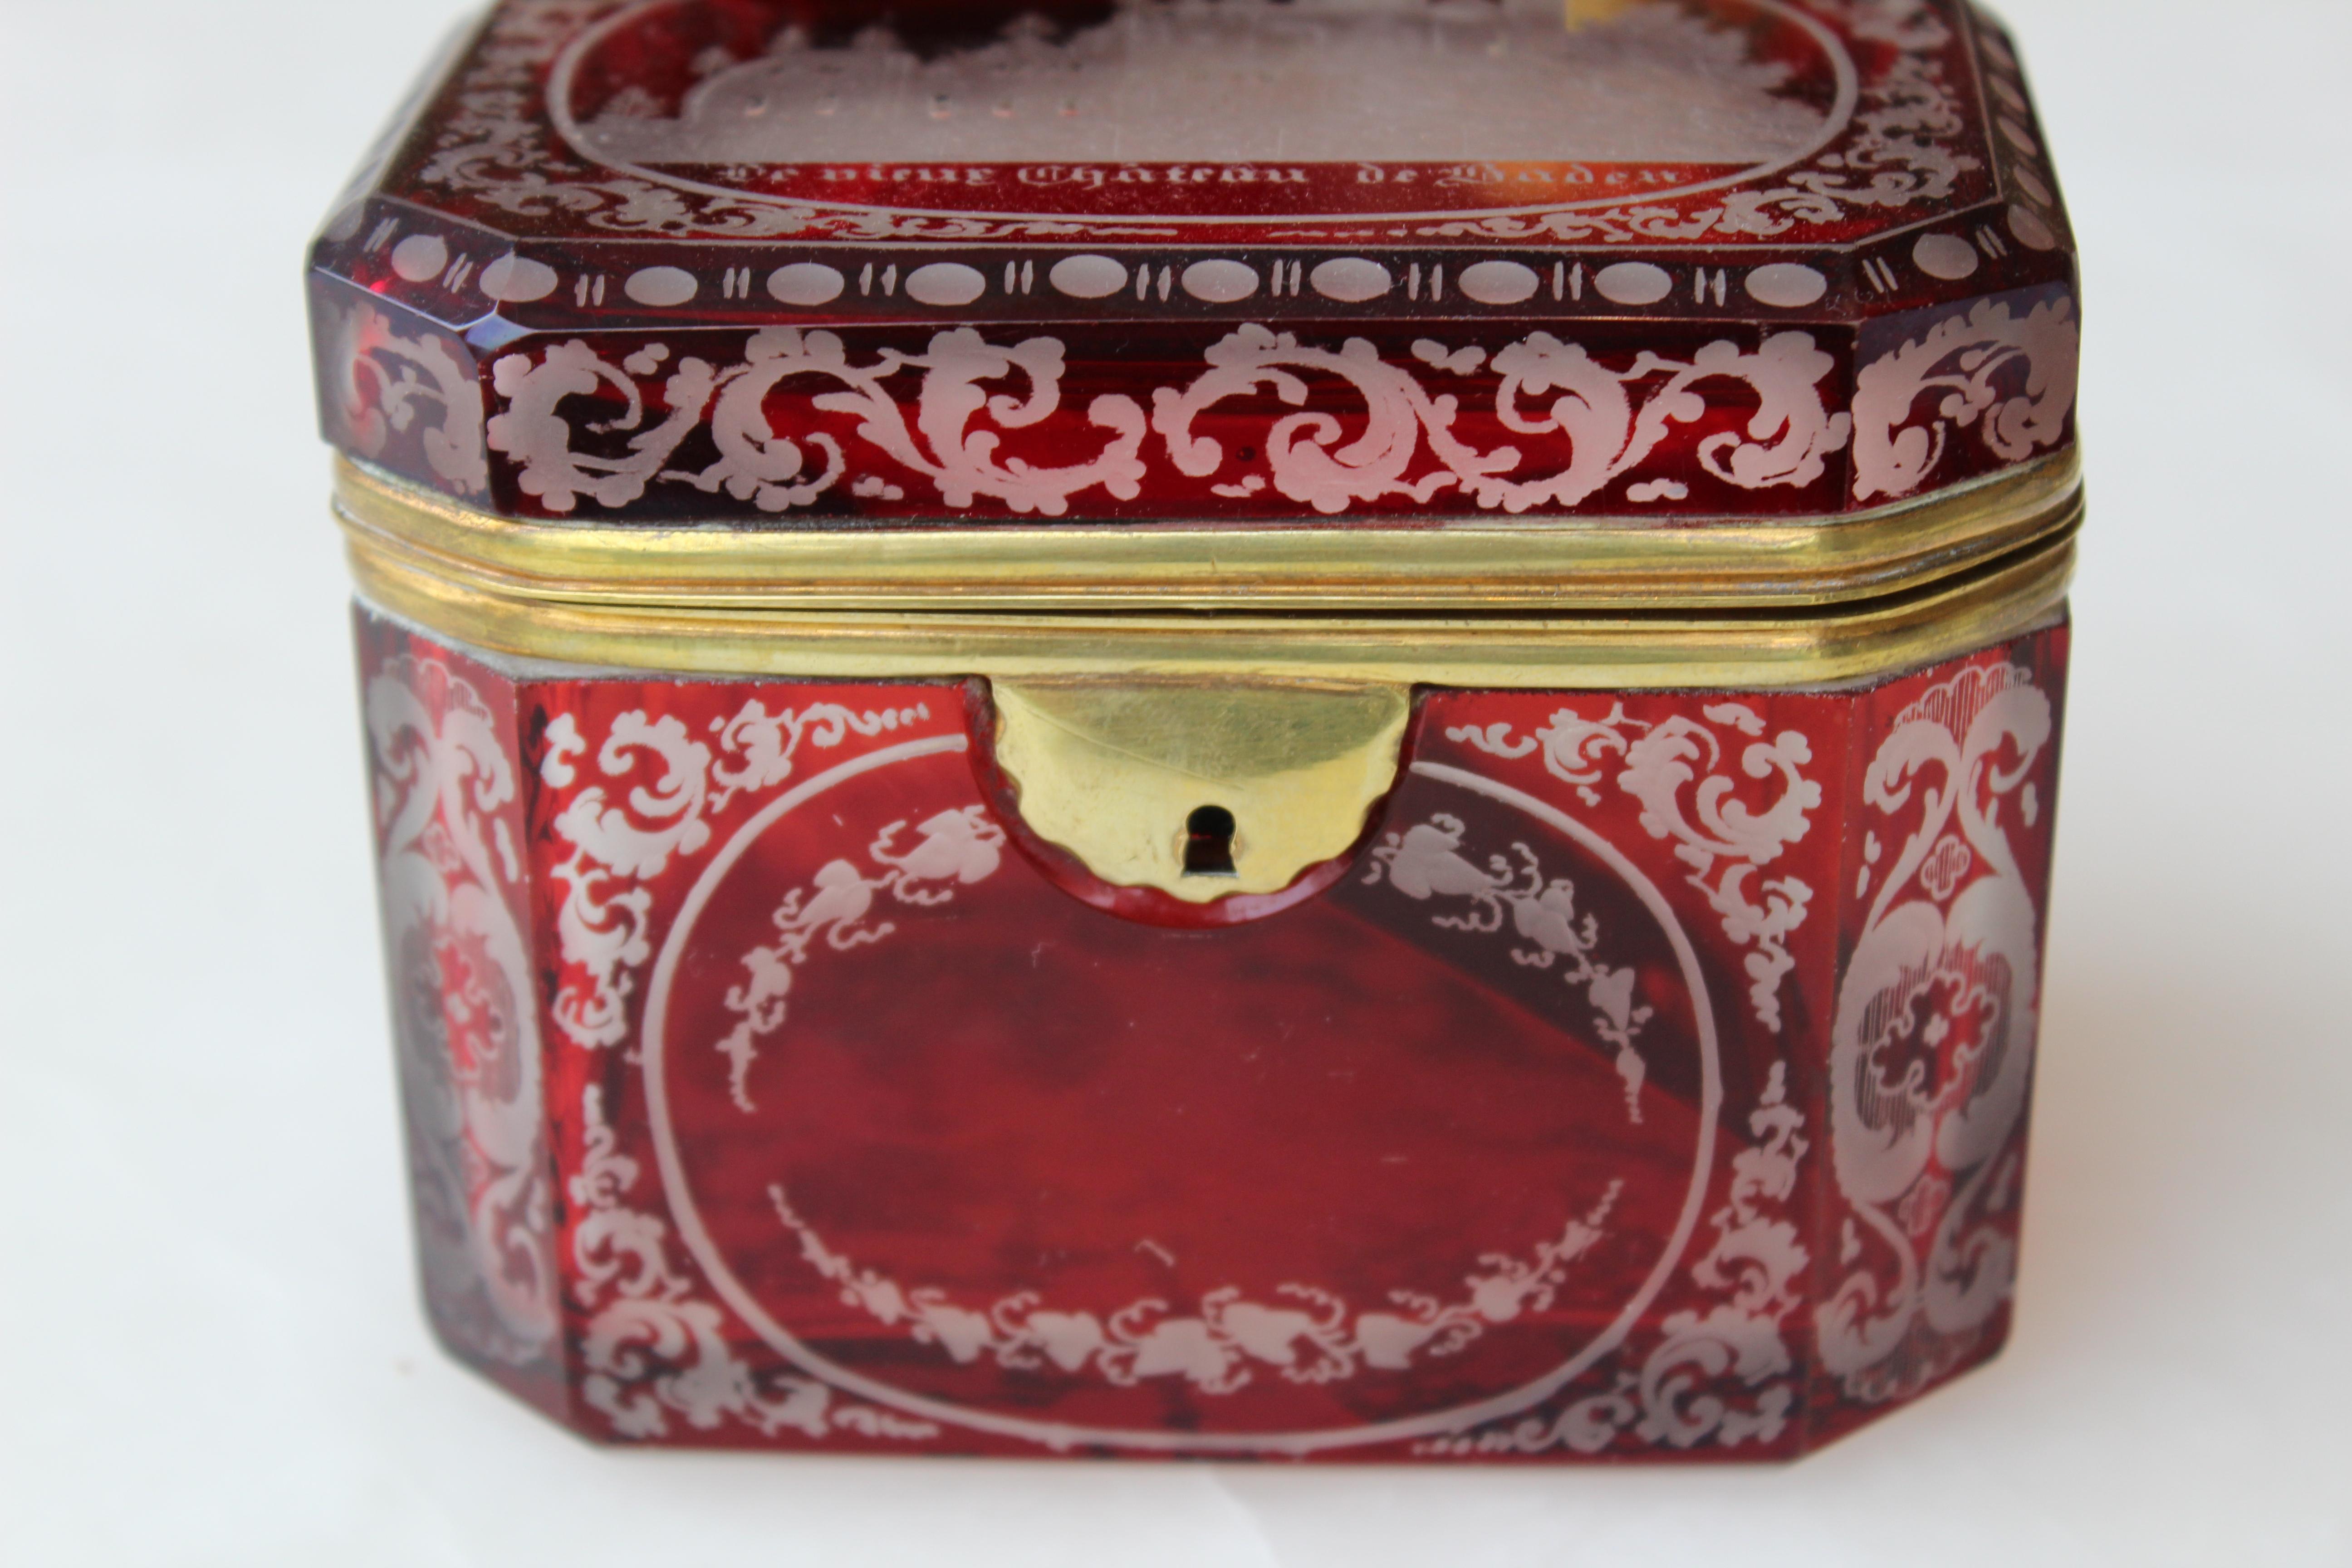 A rectangular flash cut souvenir casket in ruby red, with gilt bronze mount and escutcheon (no key), circa 1880
The cut to clear motifs depicting picturesque views of the German city of Baden-Baden. The lid is decorated with a panoramic view of the